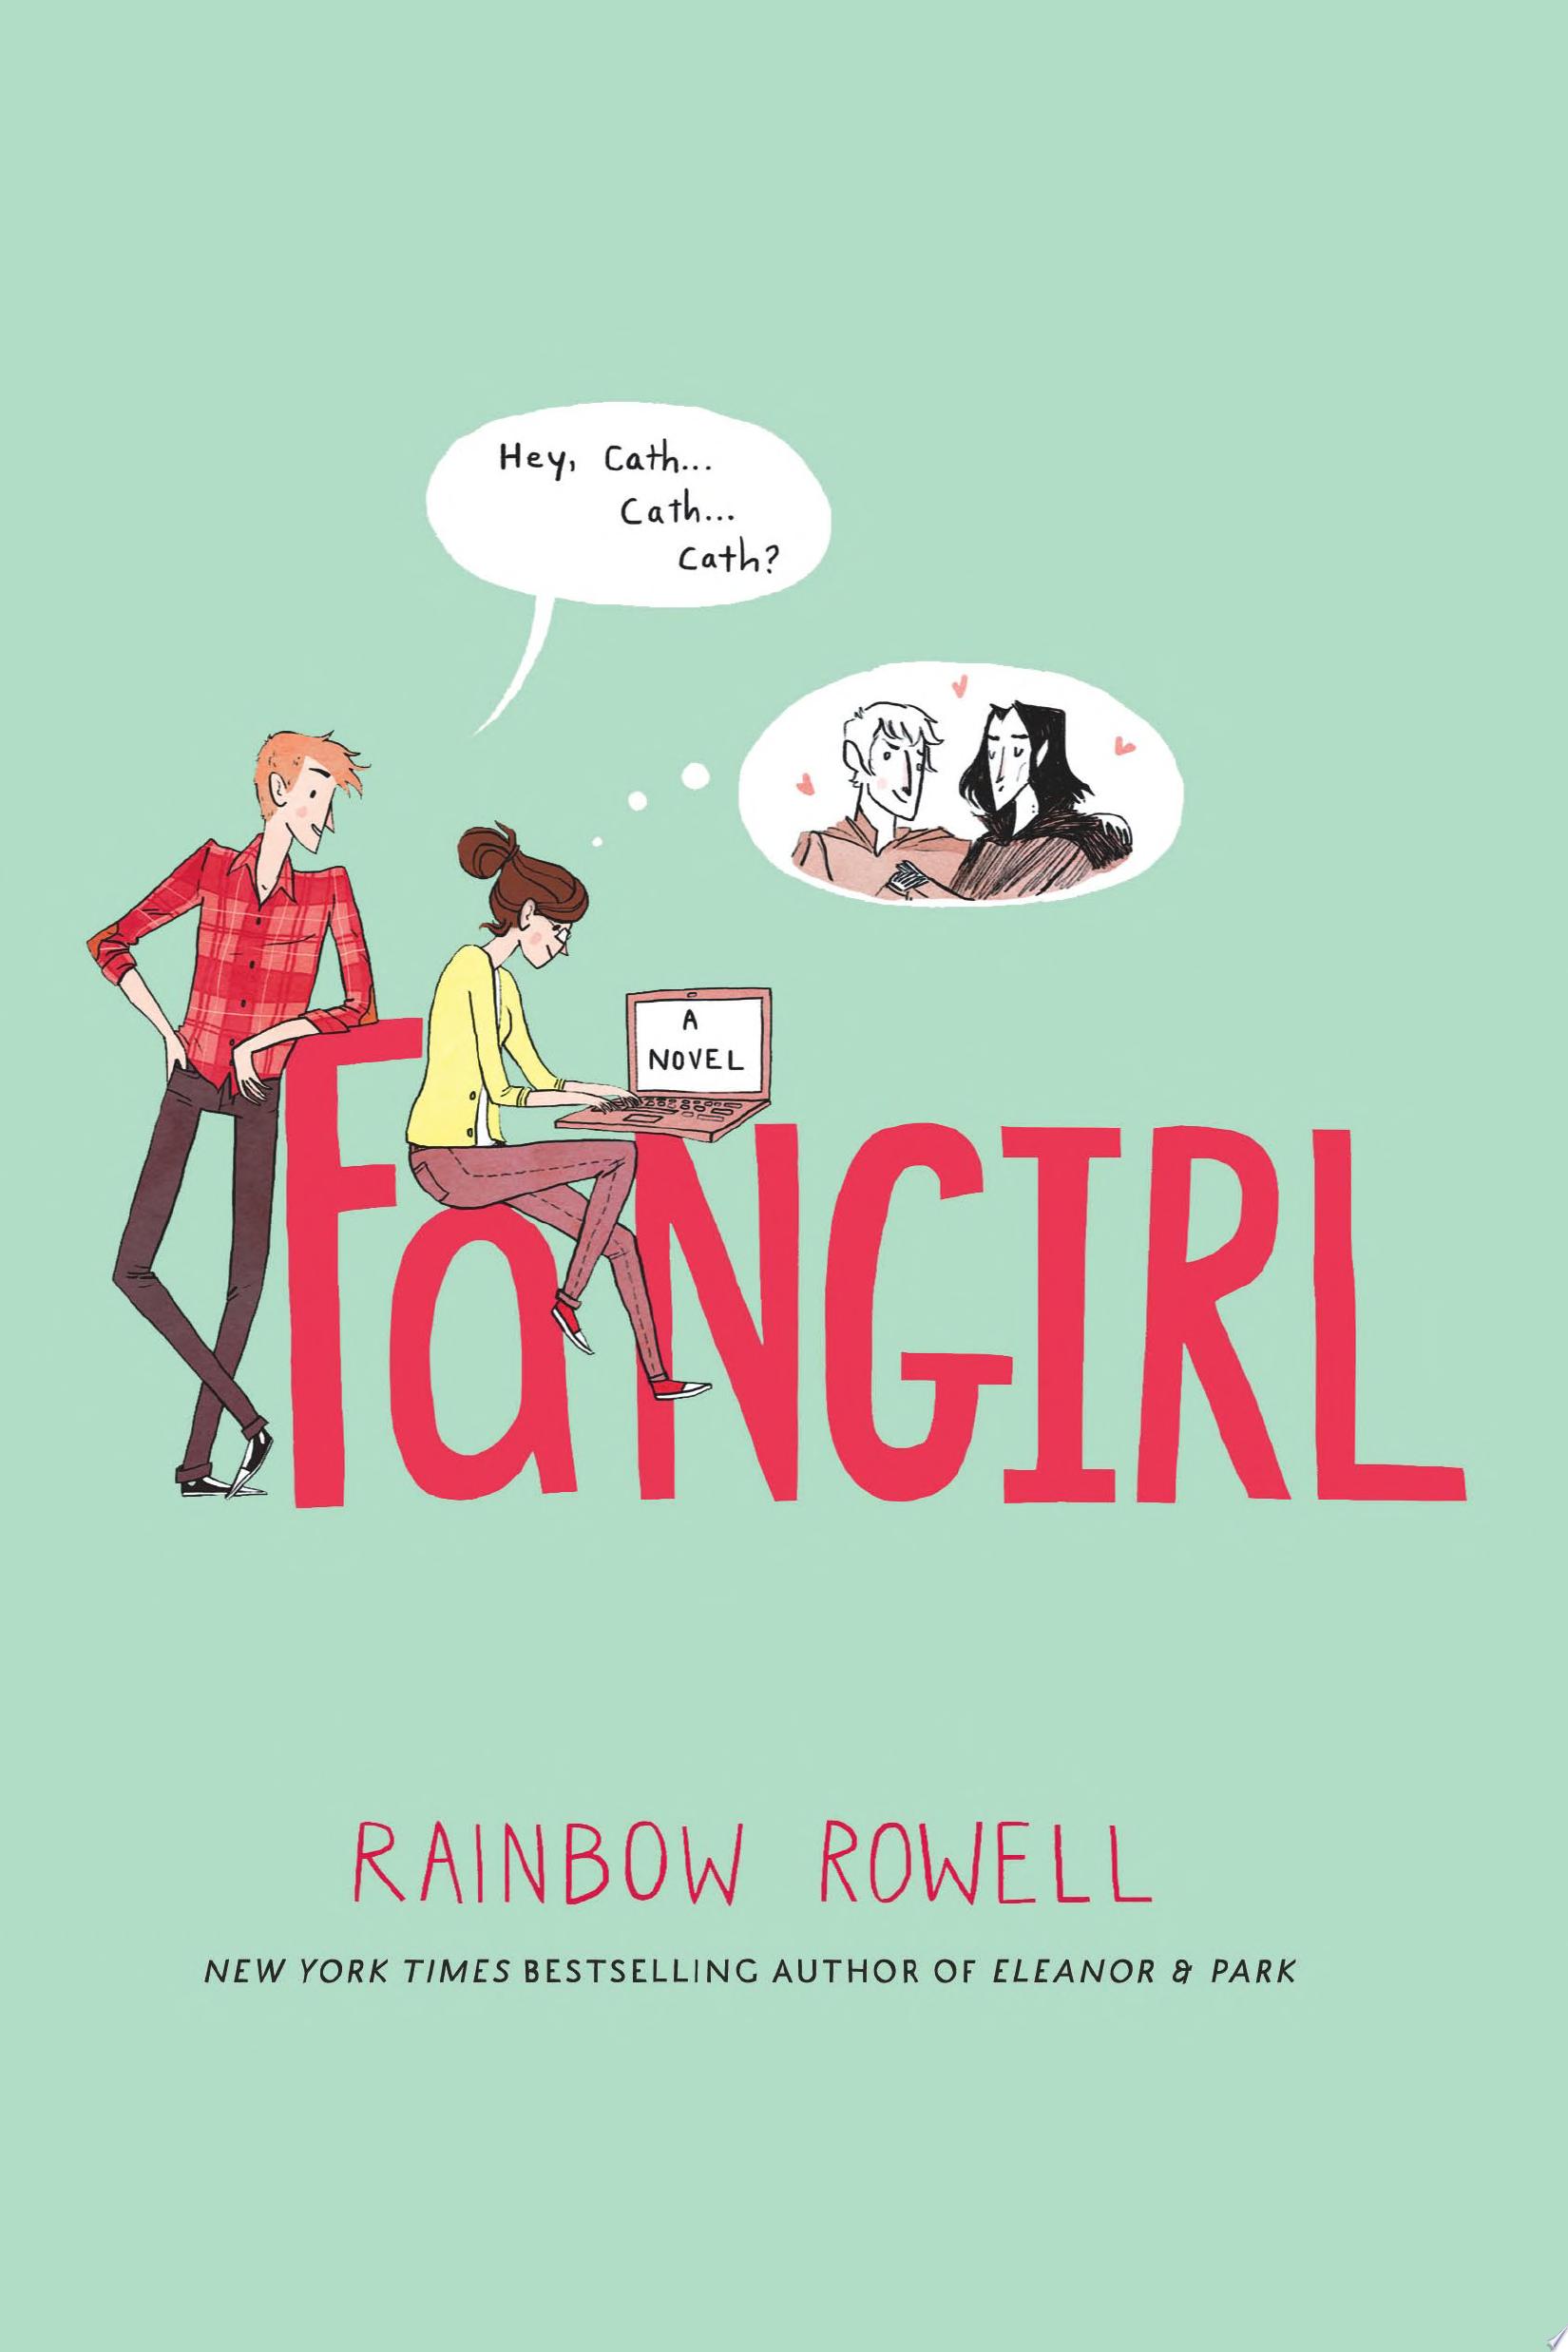 Image for "Fangirl"